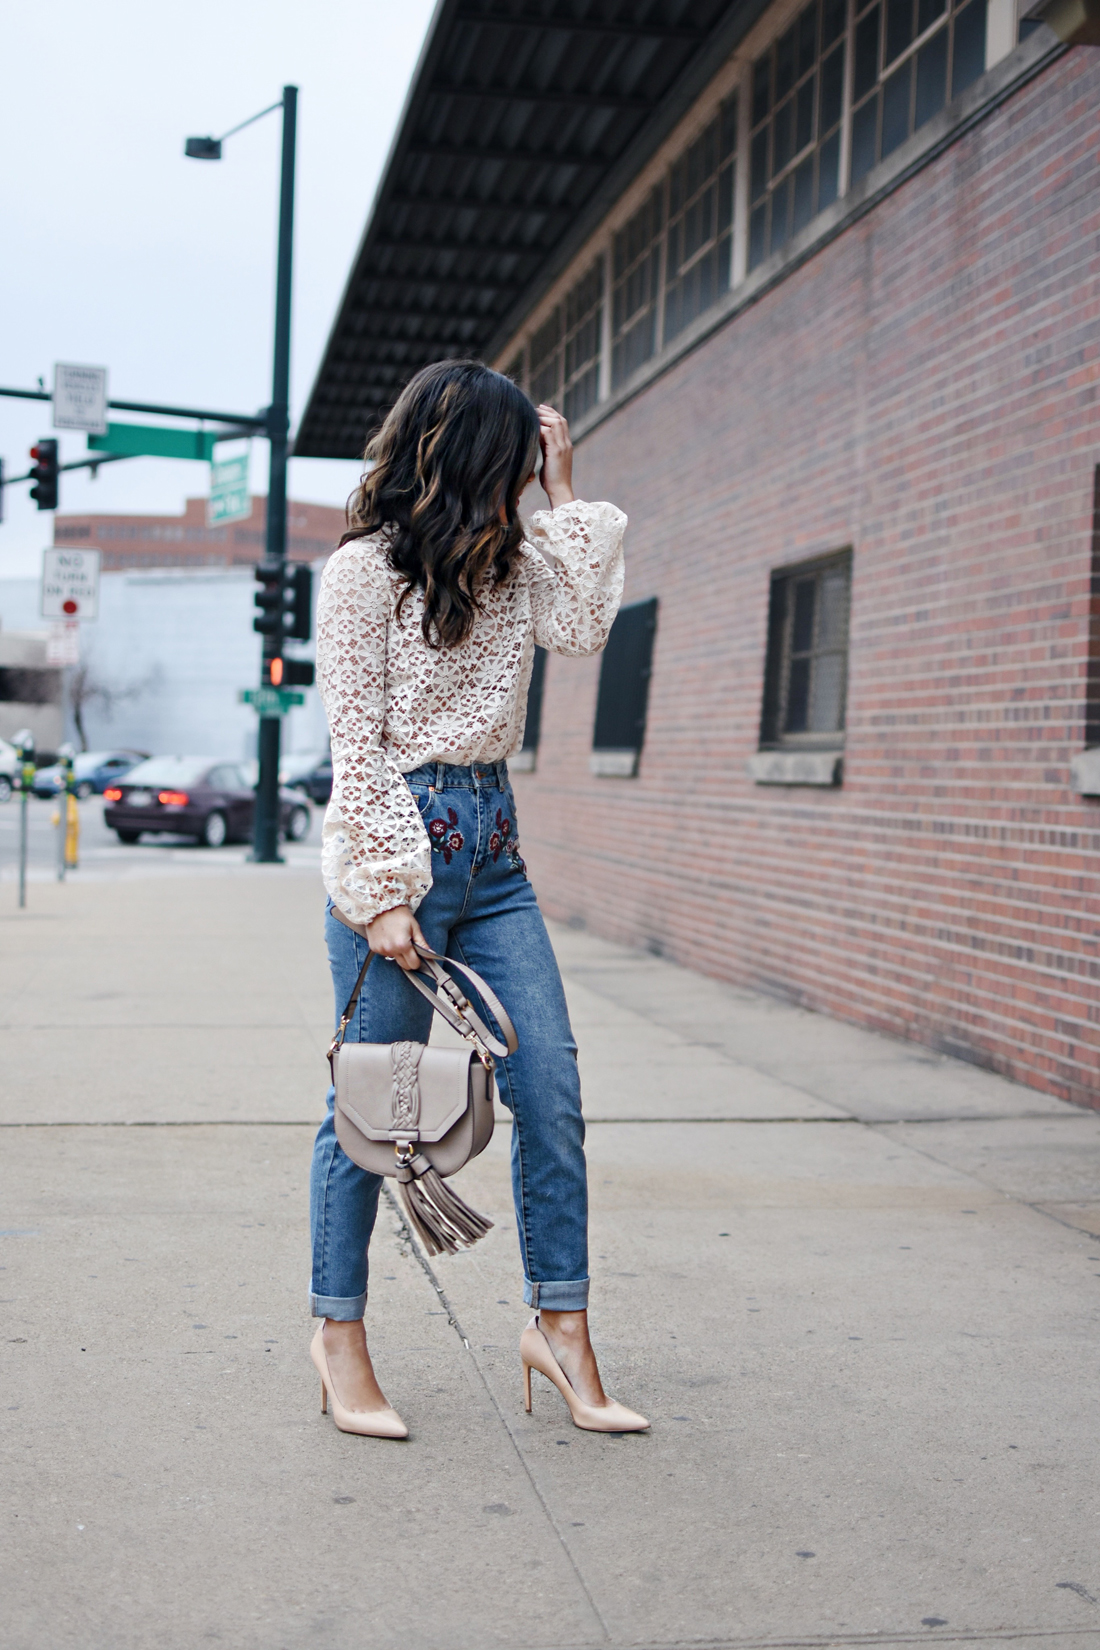 Carolina Hellal of Chic Talk wearing mom jeans, lace top, Sam Edelman nude pumps and a Moda Luxe nude bag - 5 TIPS ON HOW TO WEAR MOM JEANS by popular Denver fashion blogger Chic Talk